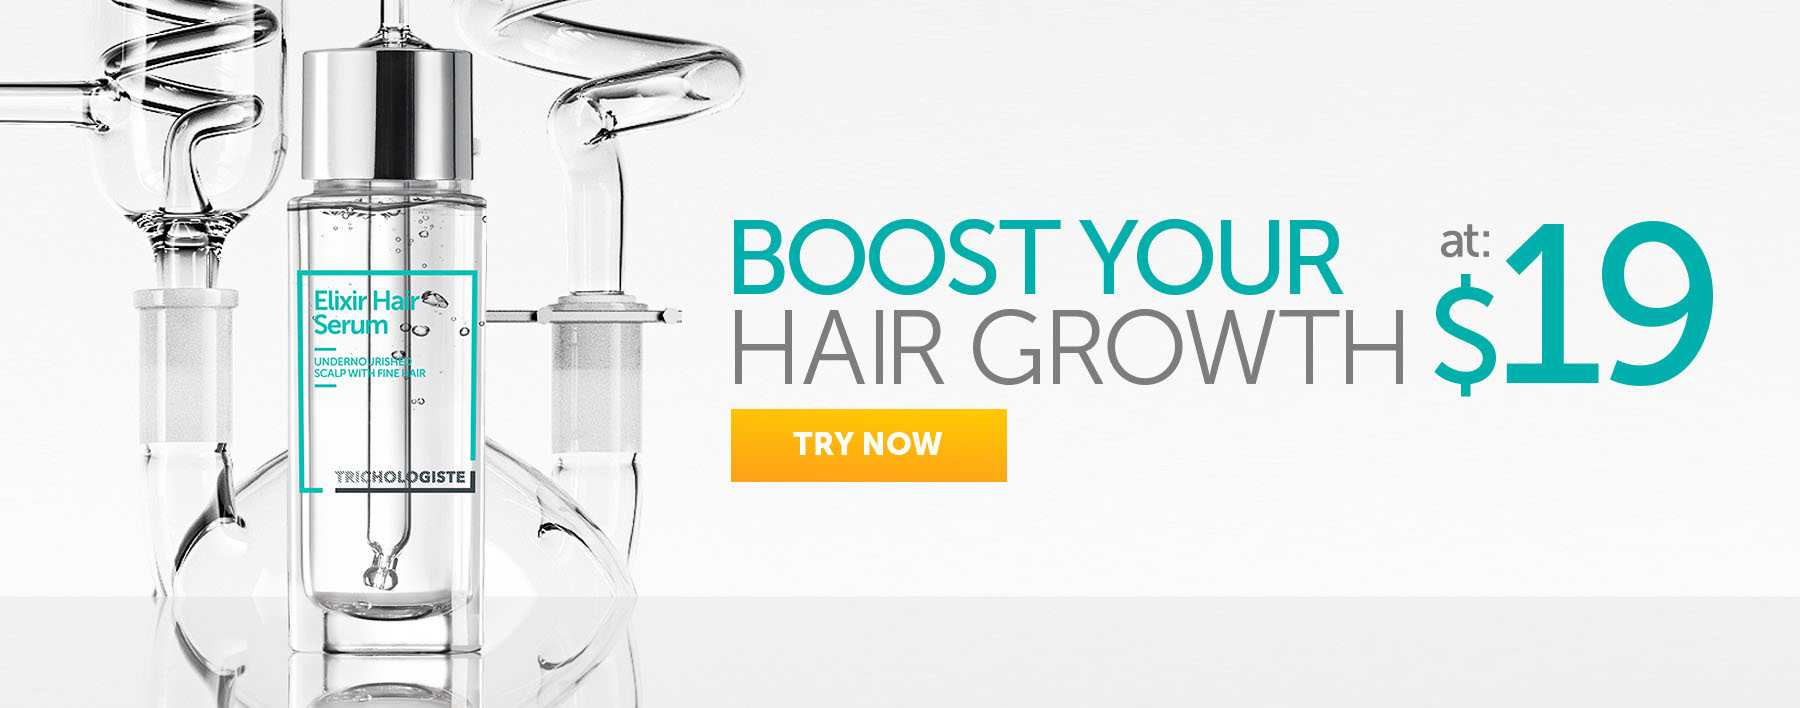 Boost your hair growth at $19